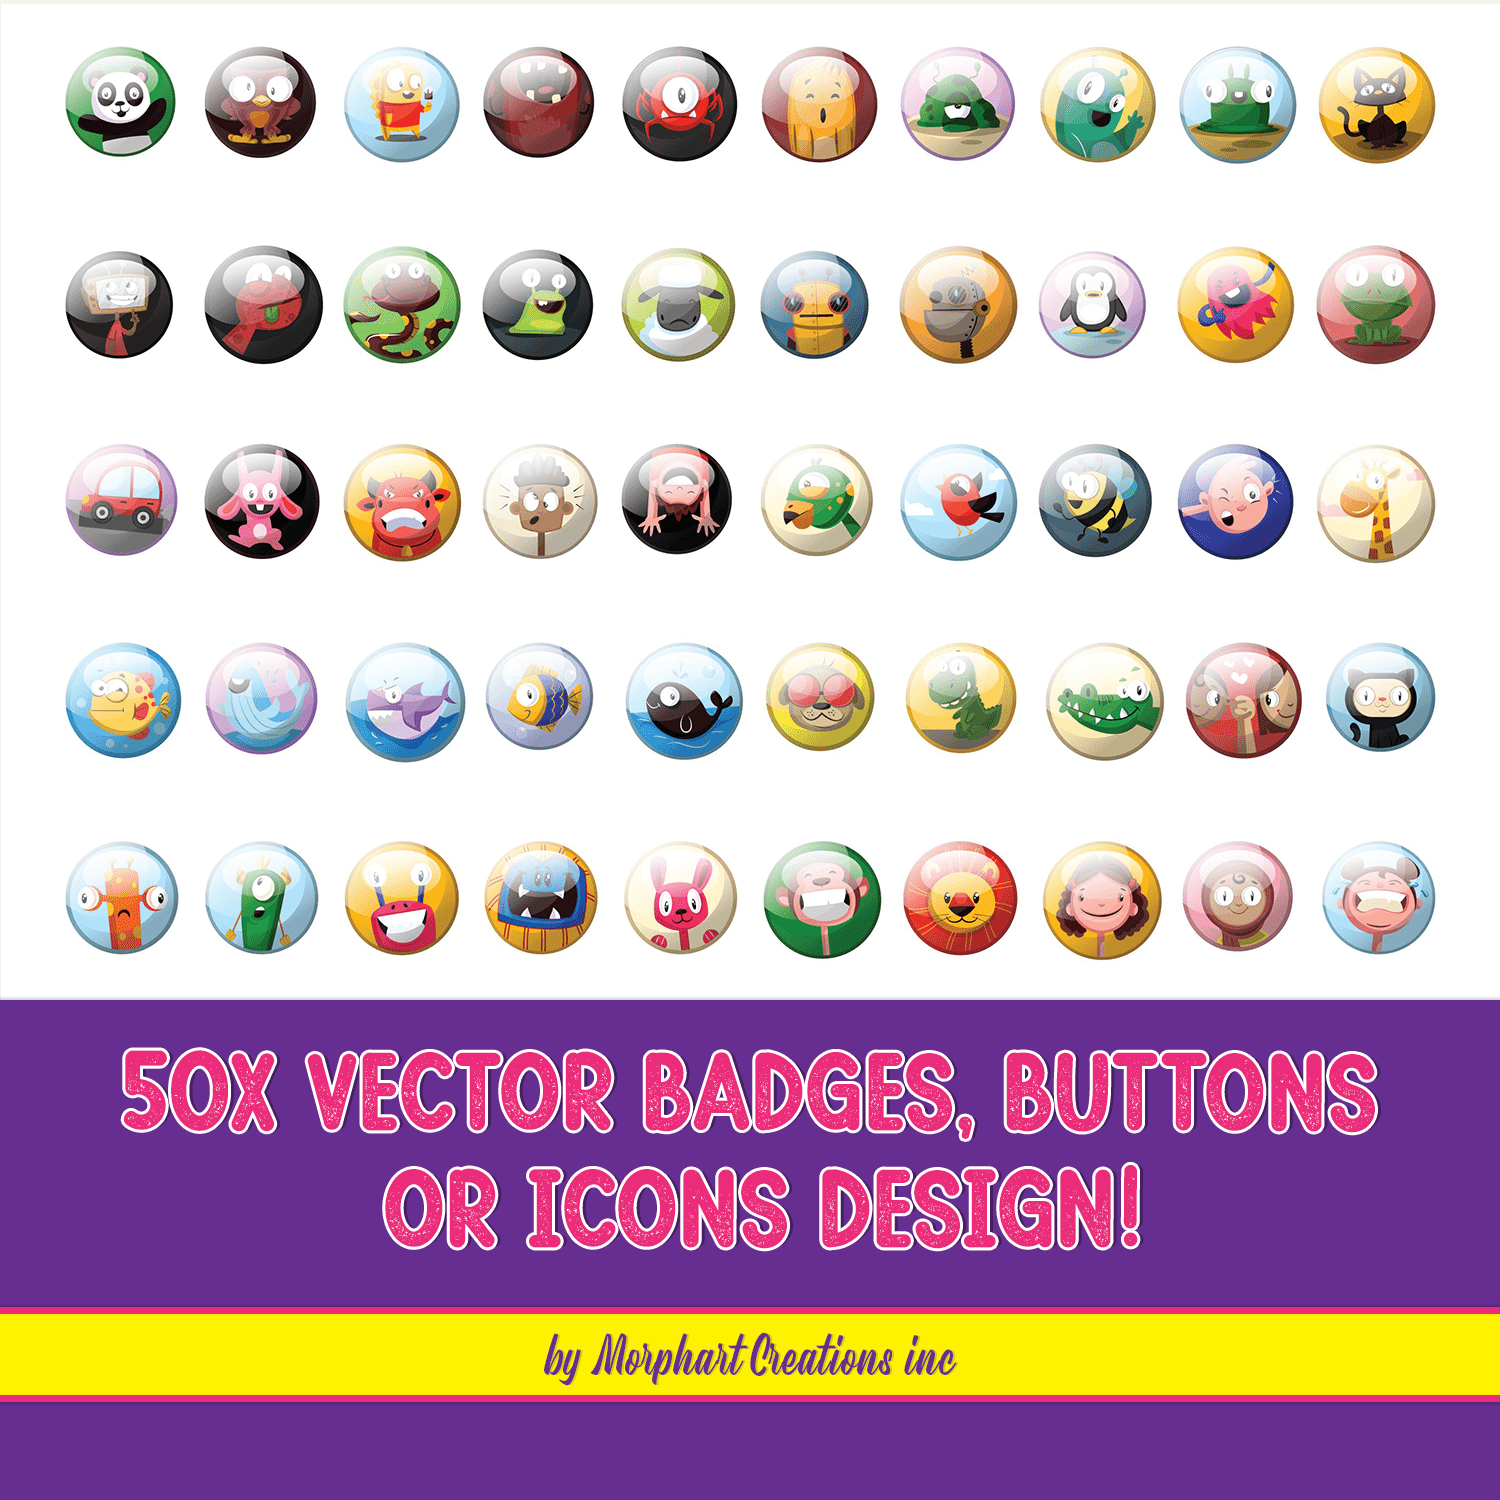 Pack of images of gorgeous cartoon icons.